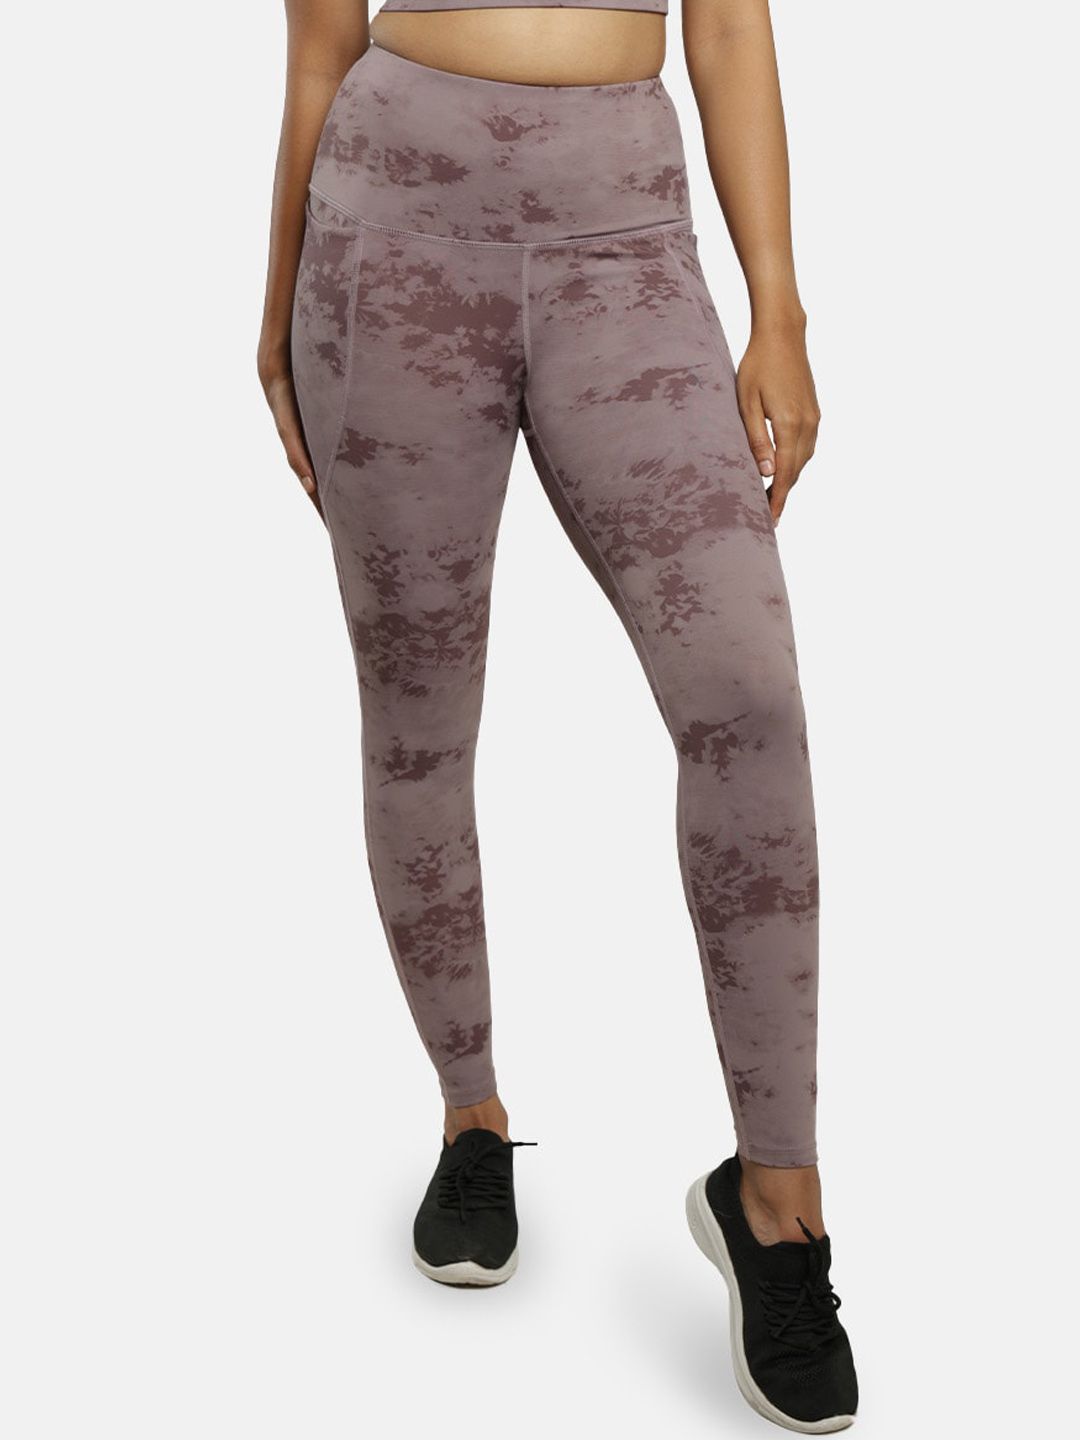 Buy Blissclub Women Lavender Groove-In Cotton Leggings with Adjustable  Inner Drawcord and Side Pockets online